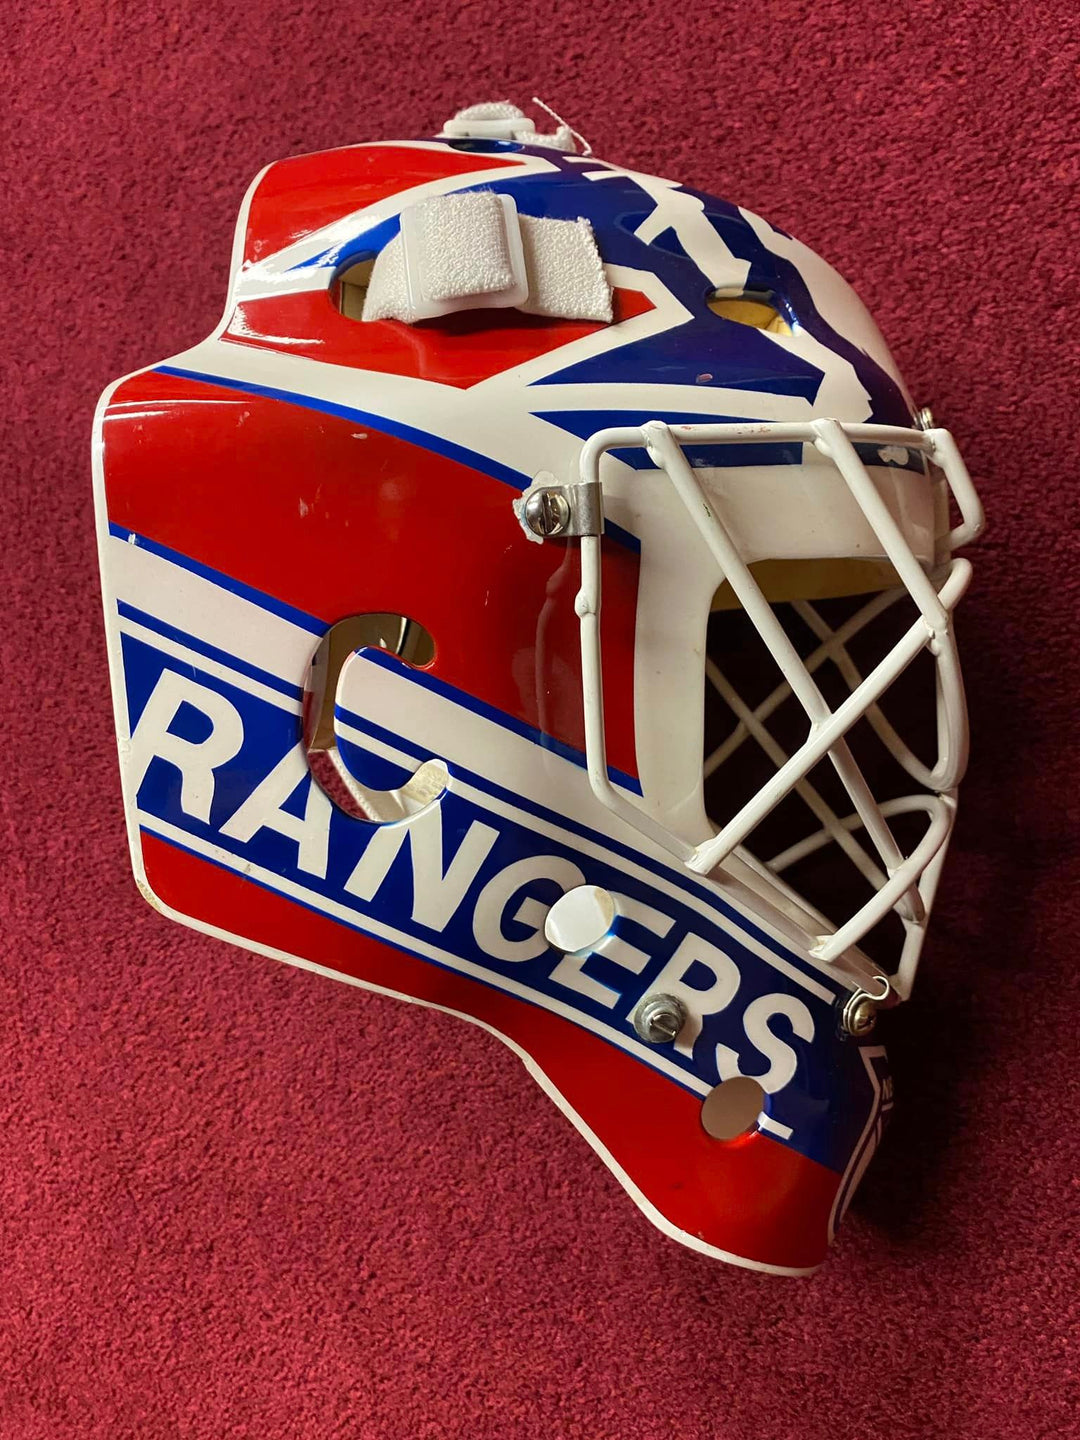 Exclusive: Mike Richter Worn Goalie Mask New Rangers Ed Cubberly